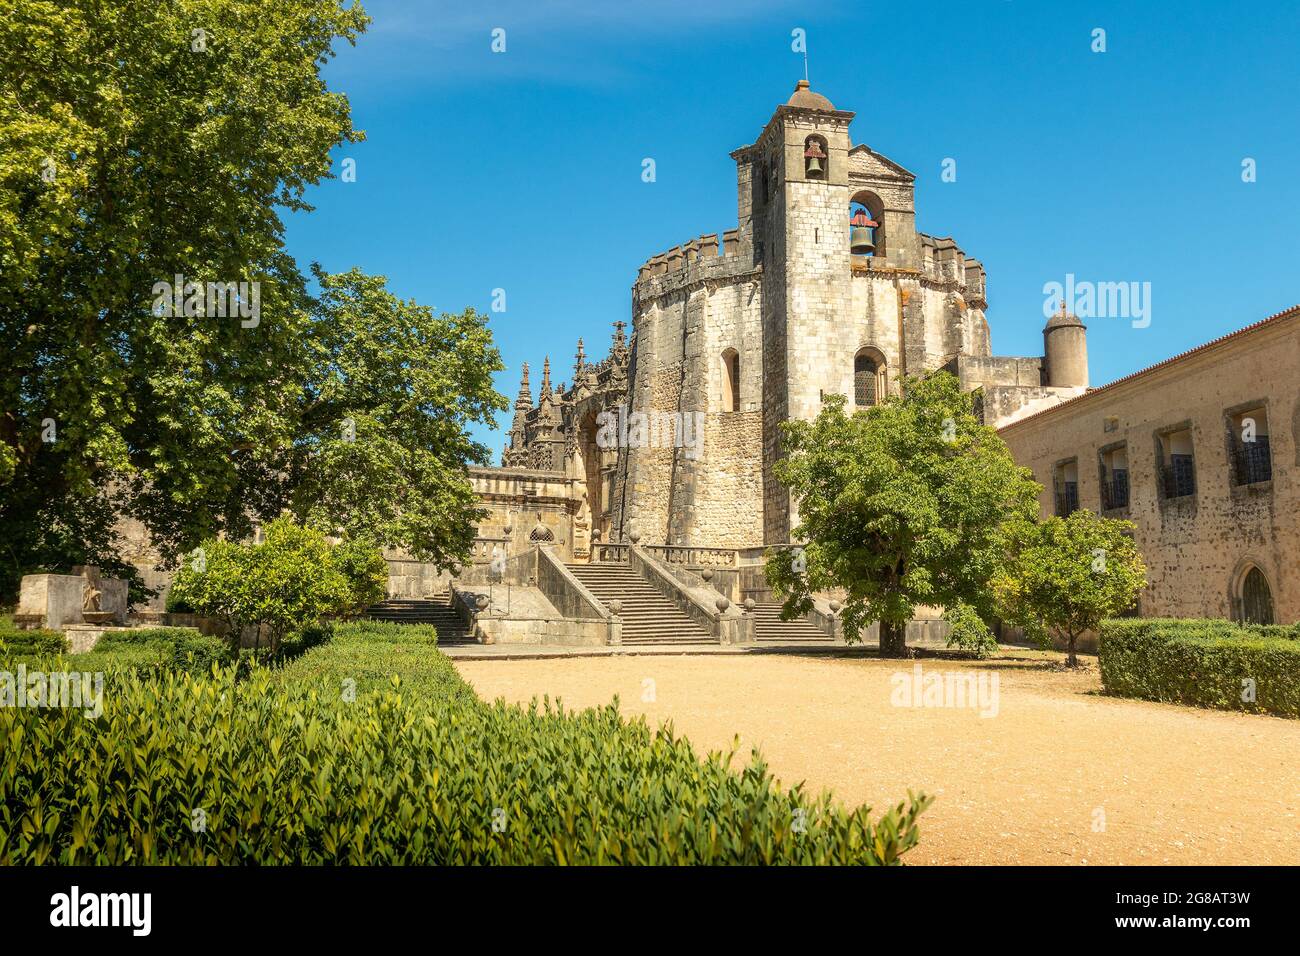 Tomar, Portugal - June 3, 2021: Exterior view of the Convento de Cristo church in Tomar, Portugal, with access path to the convent, through the garden Stock Photo